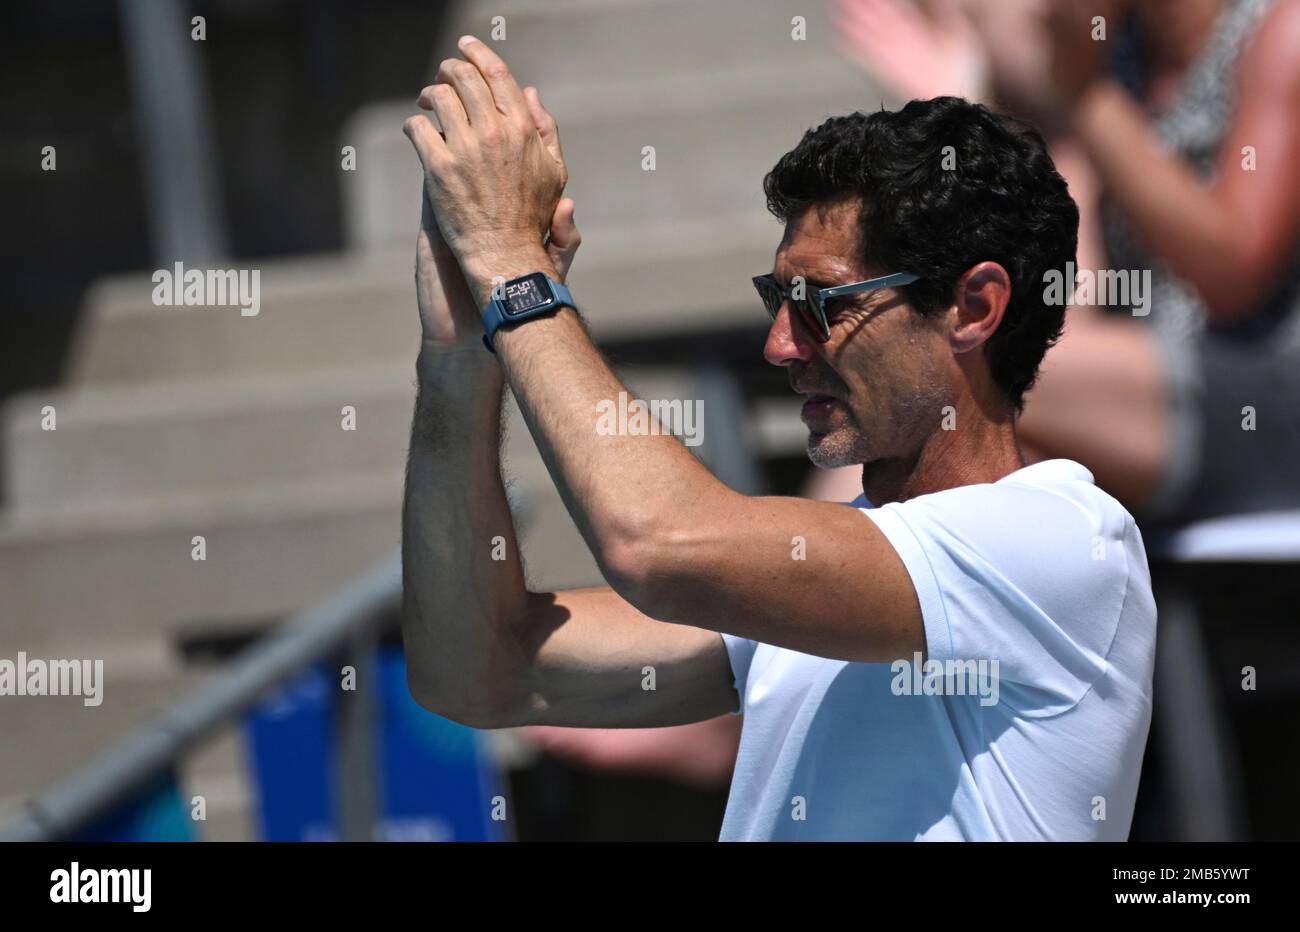 Spain head coach Miguel Angel Oca Gaia reacts during the Womens water polo classification match between France and Spain at the 19th FINA World Championships in Budapest, Hungary, Thursday, June 30, 2022